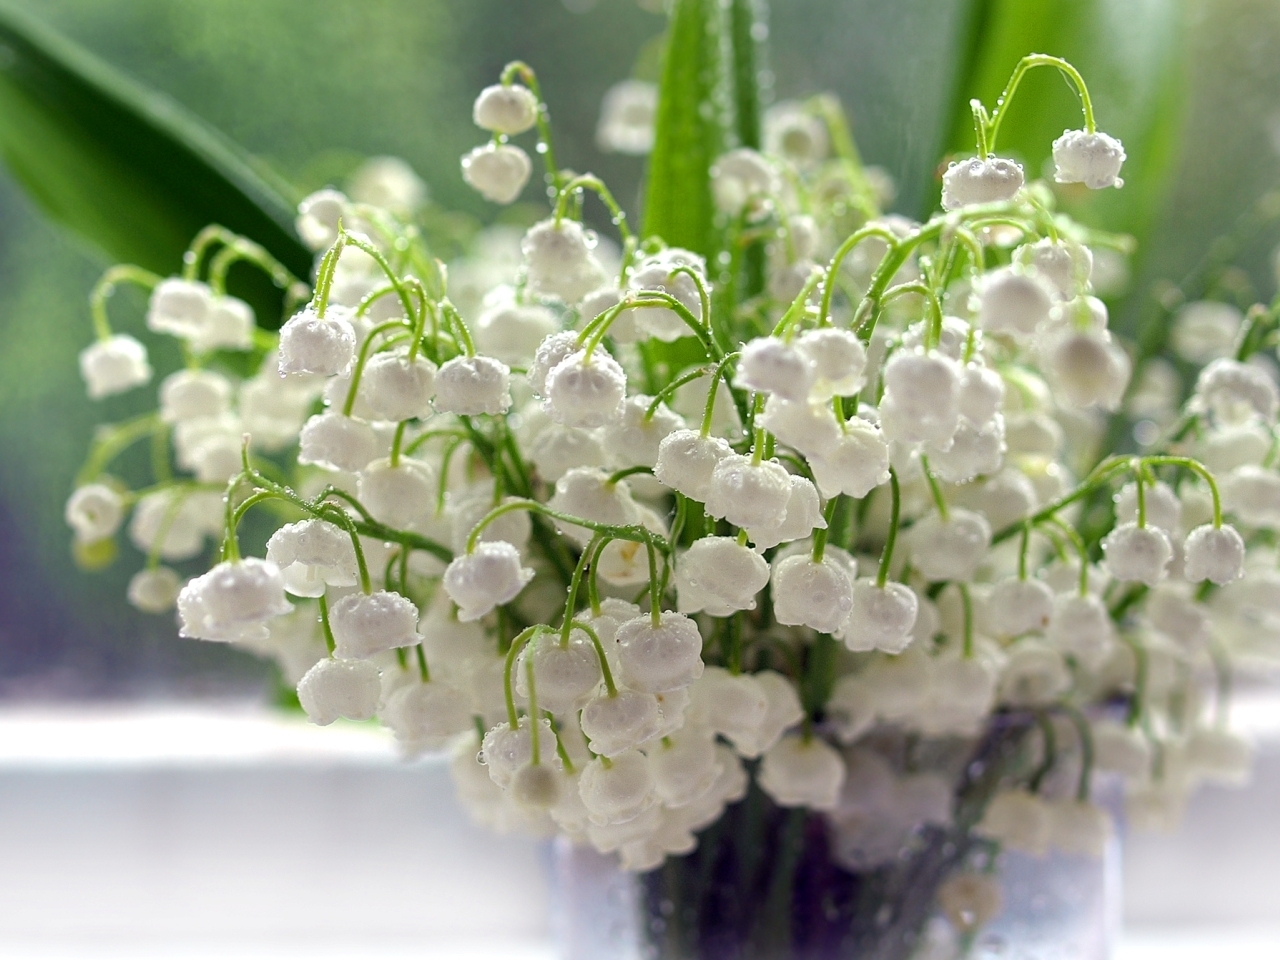 drops, plants, flowers, lily of the valley